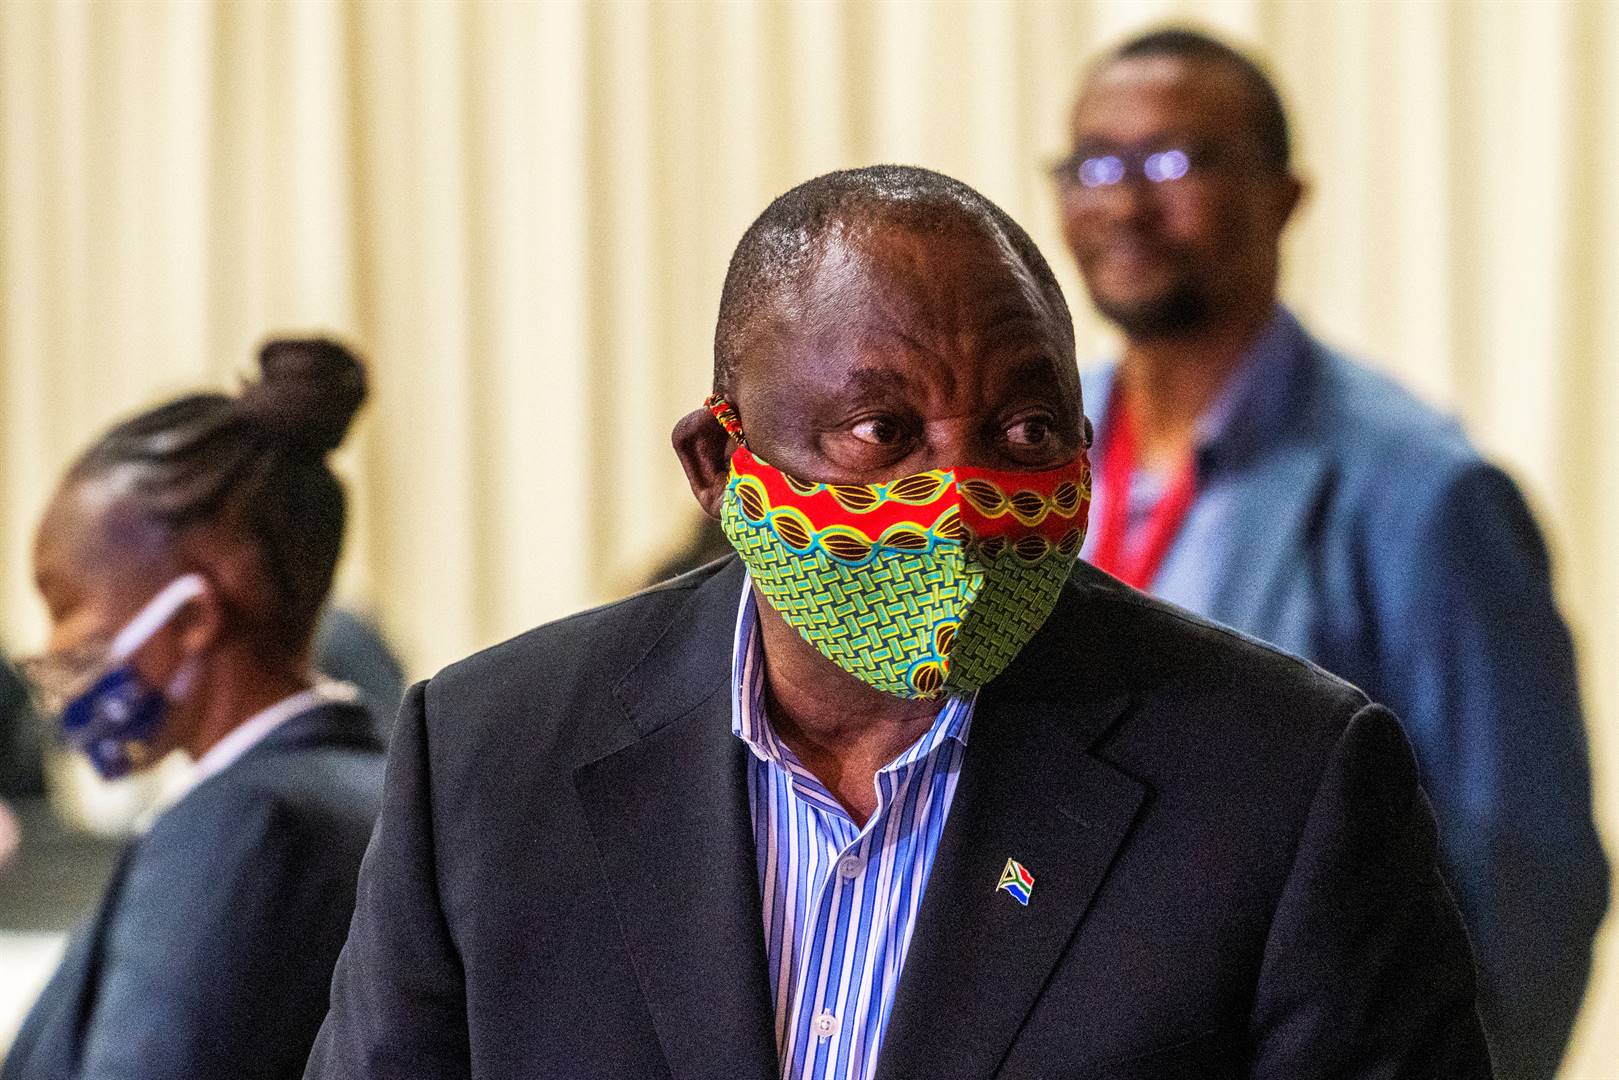 President Cyril Ramaphosa visits the Covid-19 treatment facilities at the Nasrec Expo Centre in Johannesburg. Picture: Jerome Delay/Pool via Reuters